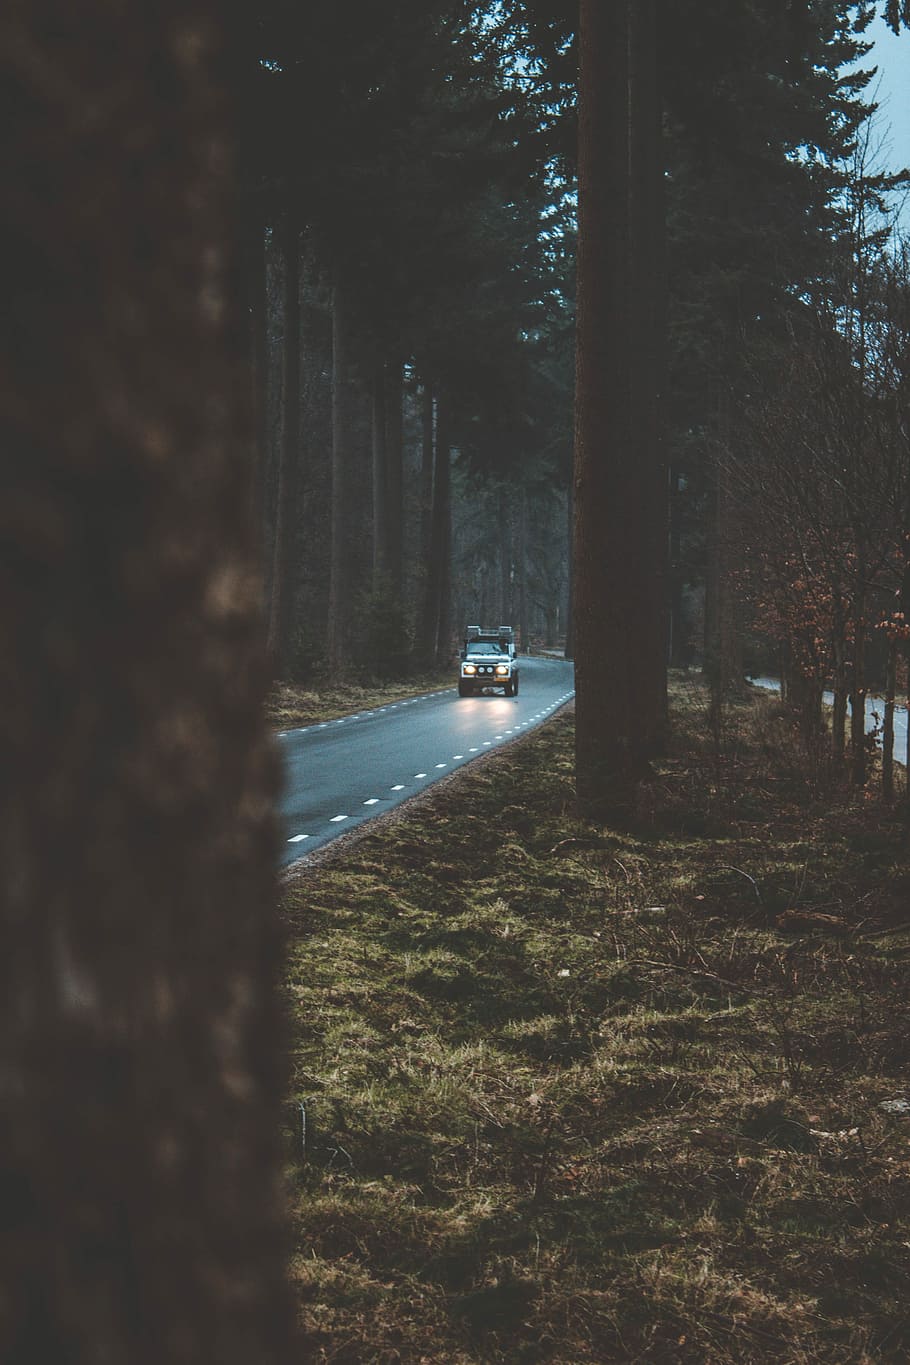 vehicle on road in between the trees, white vehicle driving between forest during nighttime